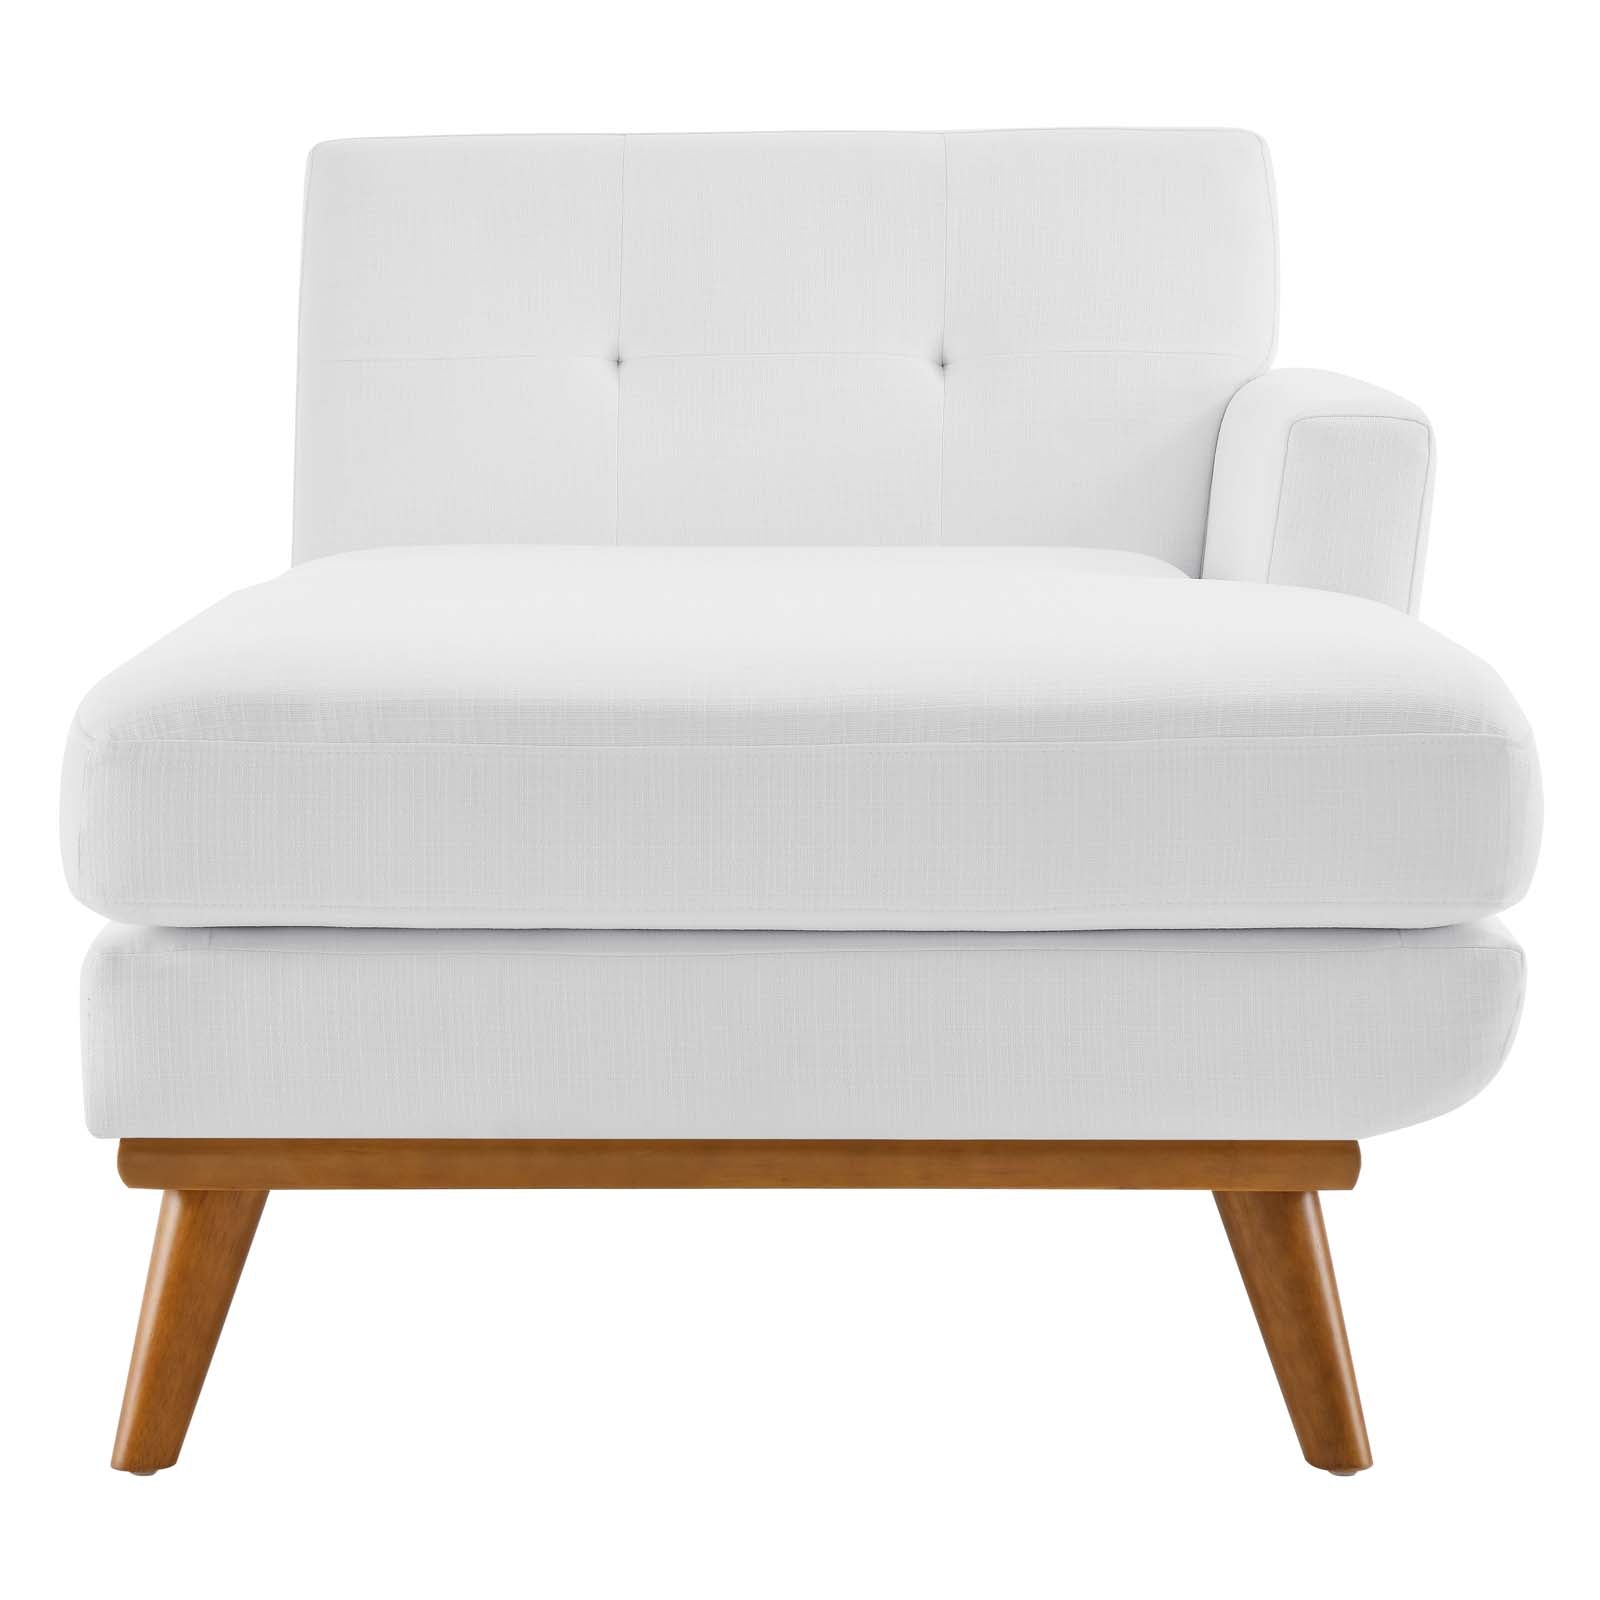 Modway Sleepers & Futons - Engage Right-Facing Upholstered Fabric Chaise White